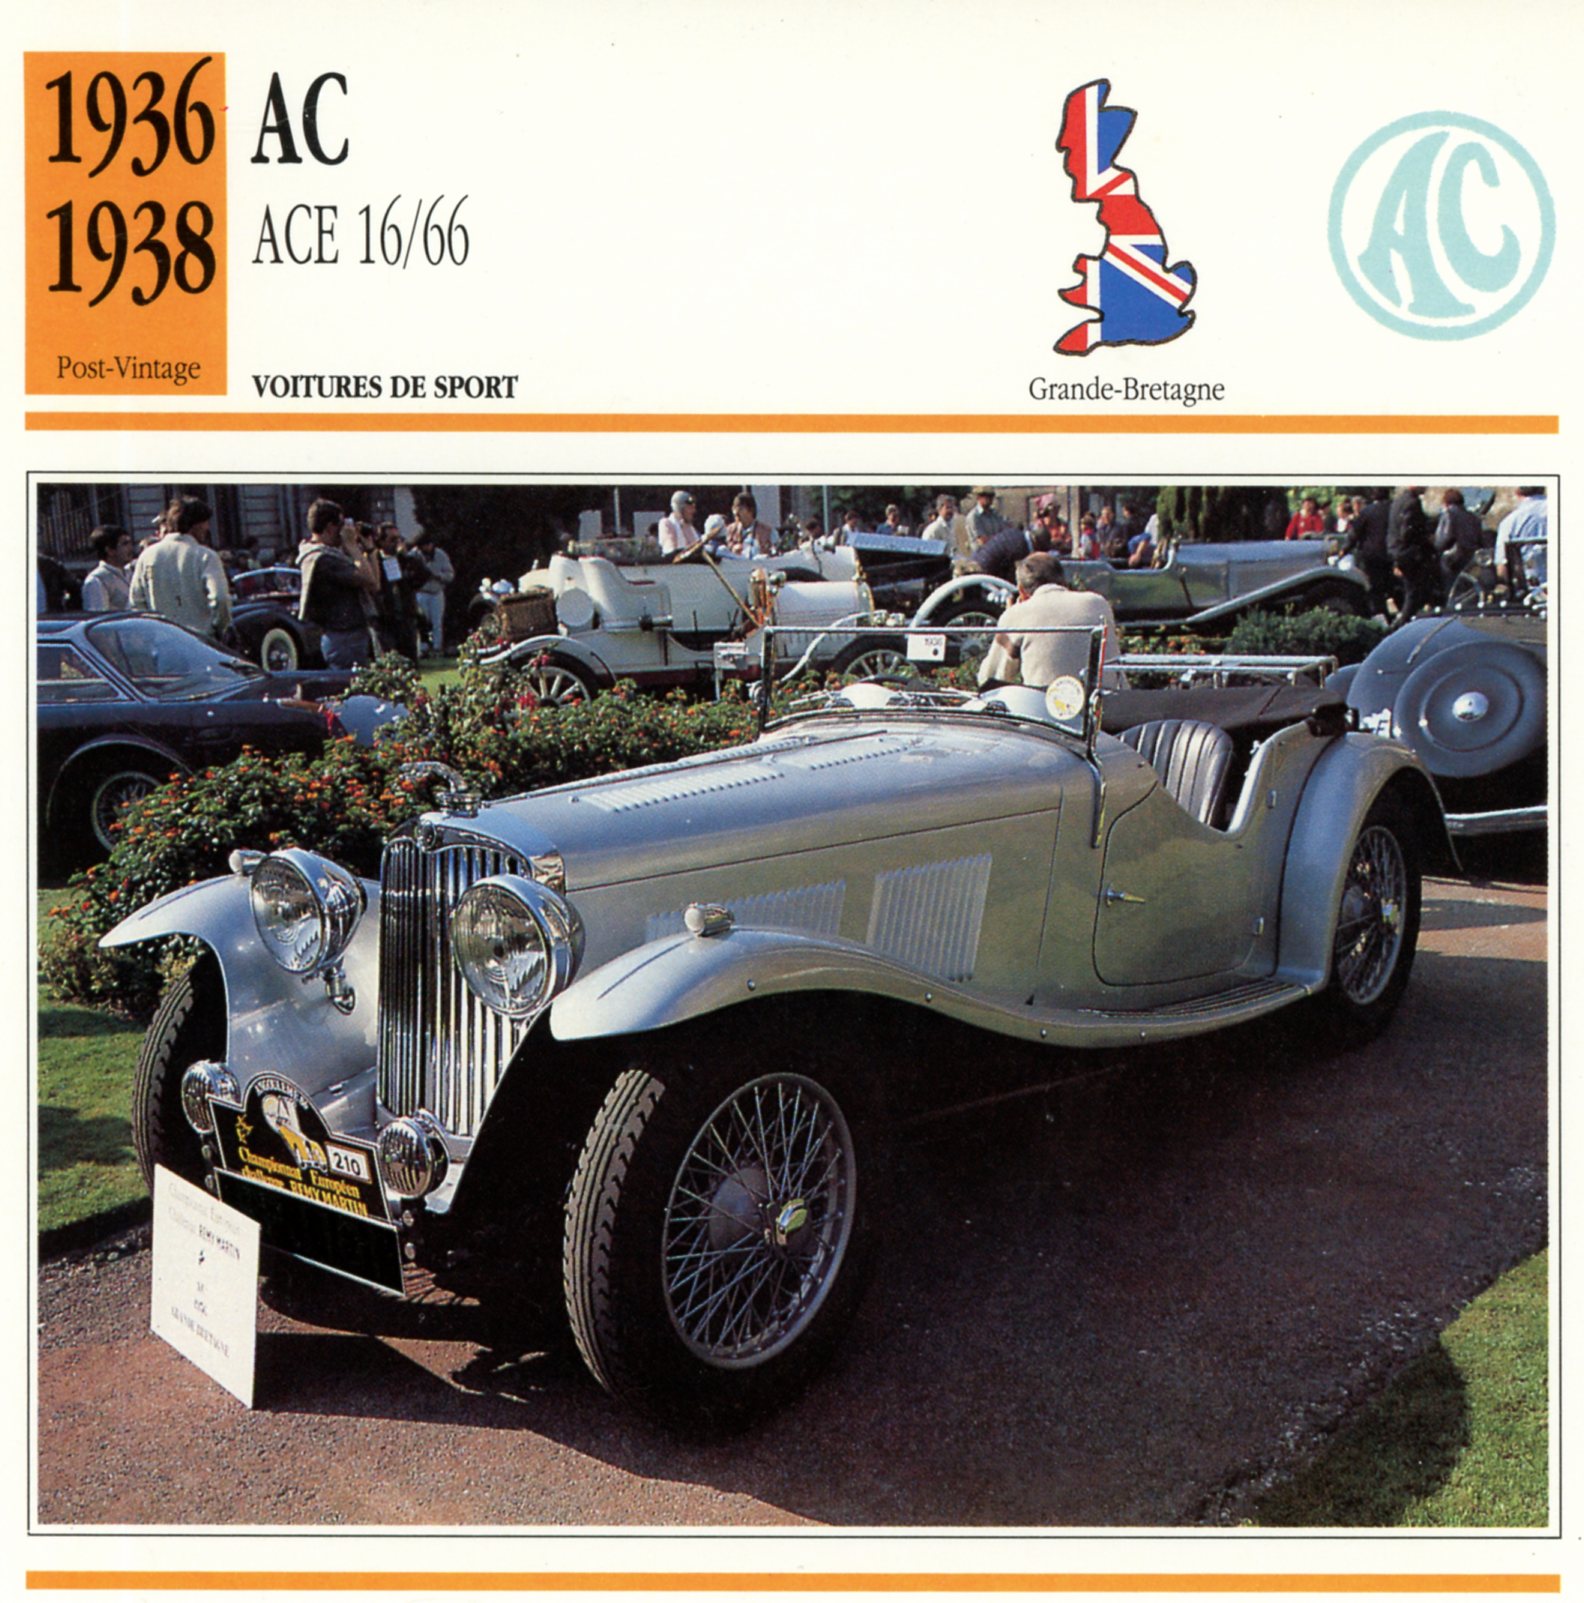 FICHE-AUTO-AC-ACE-16/66-1936-1938-LEMASTERBROCKERS-CARS-CARD